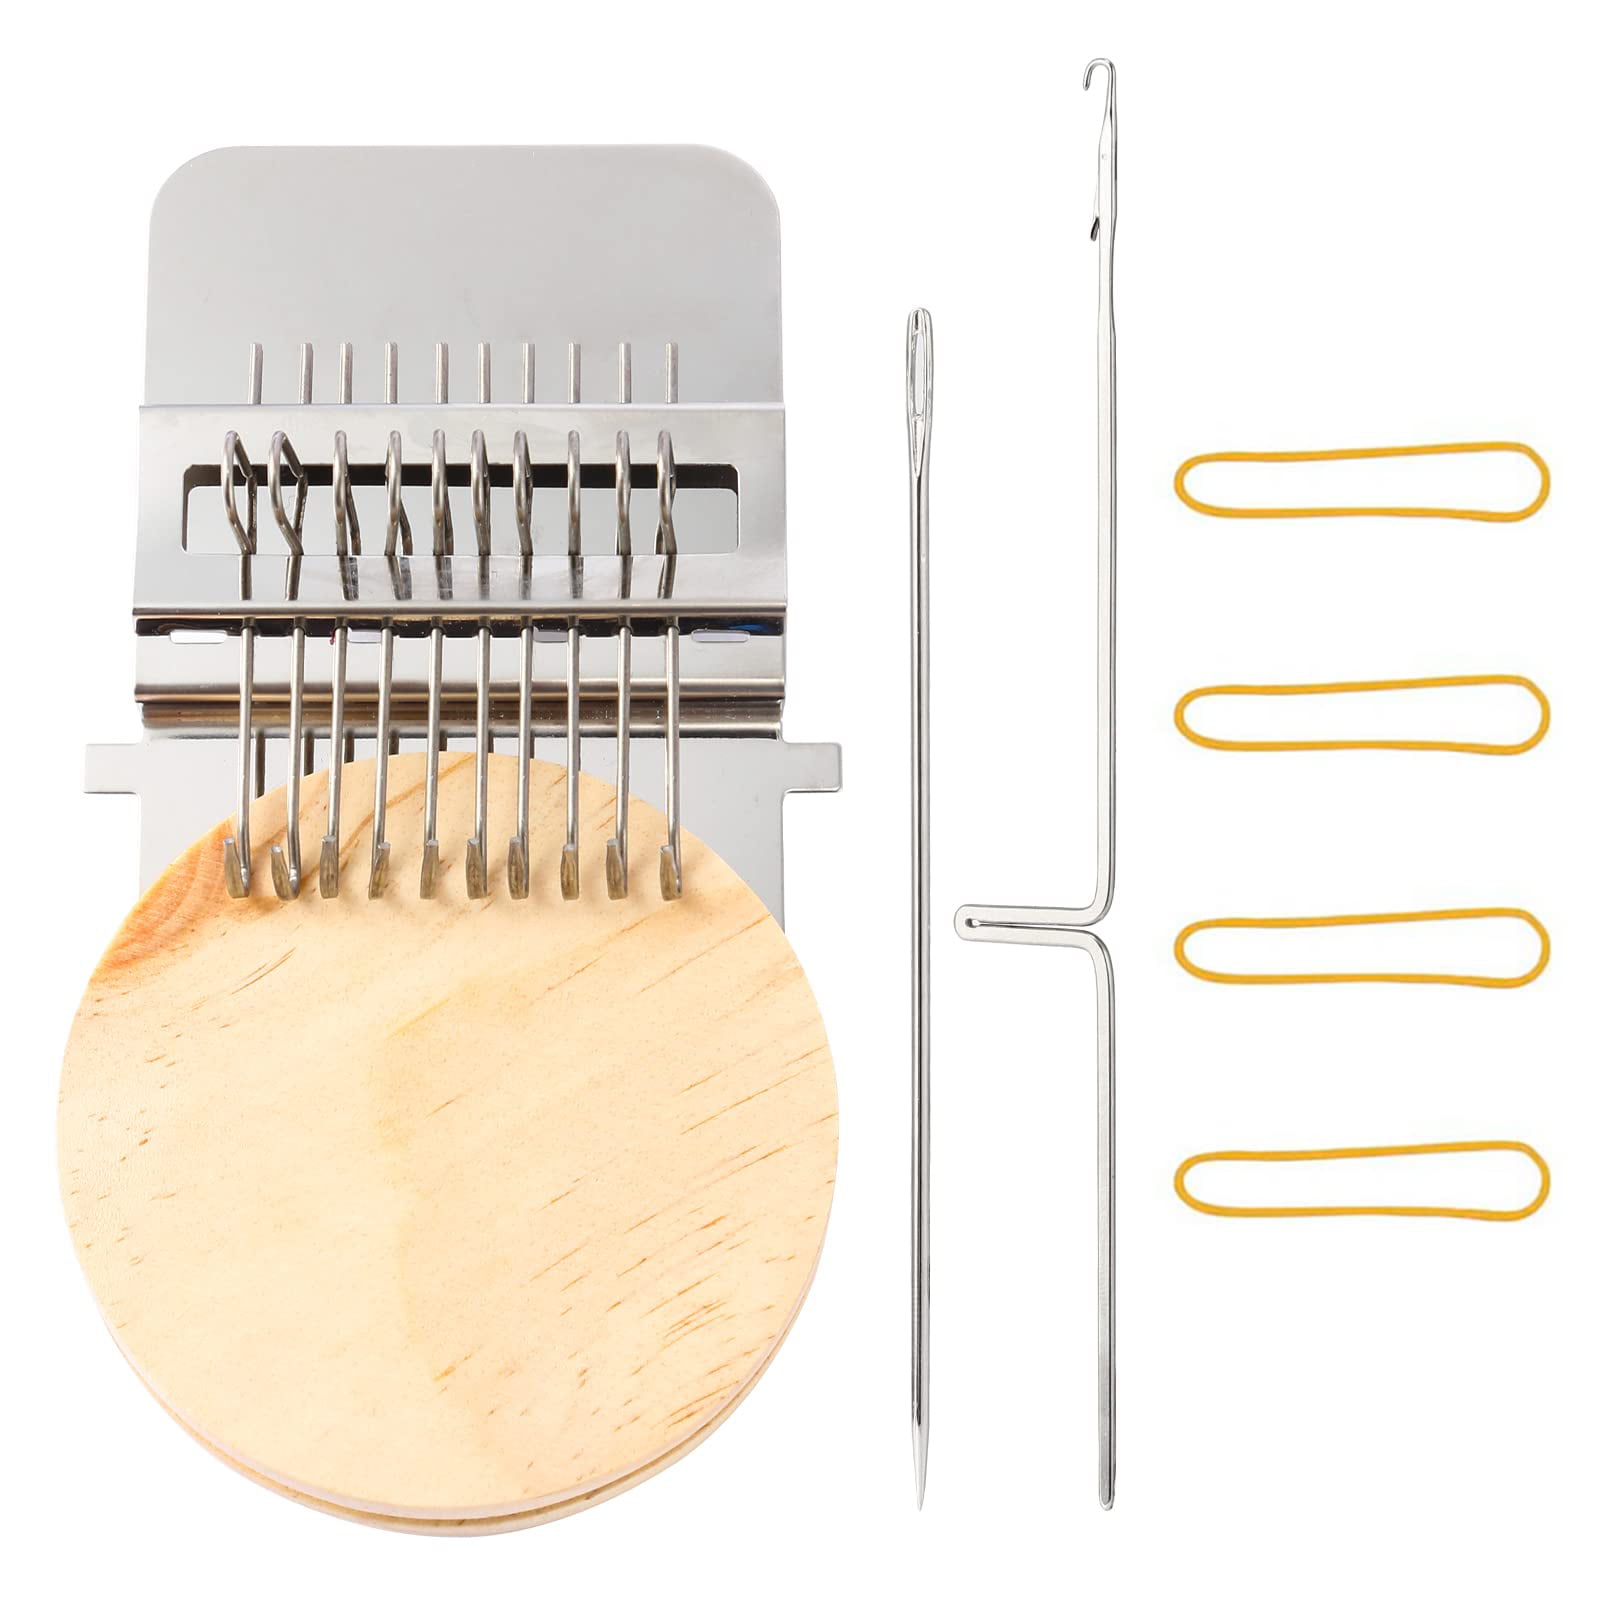 Fun Mending Loom Makes Beautiful Stitching Small Loom Speedweve Type Weave Tool 10cm for Mending Jeans Socks and Clothes Most Convenient Darning Loom 